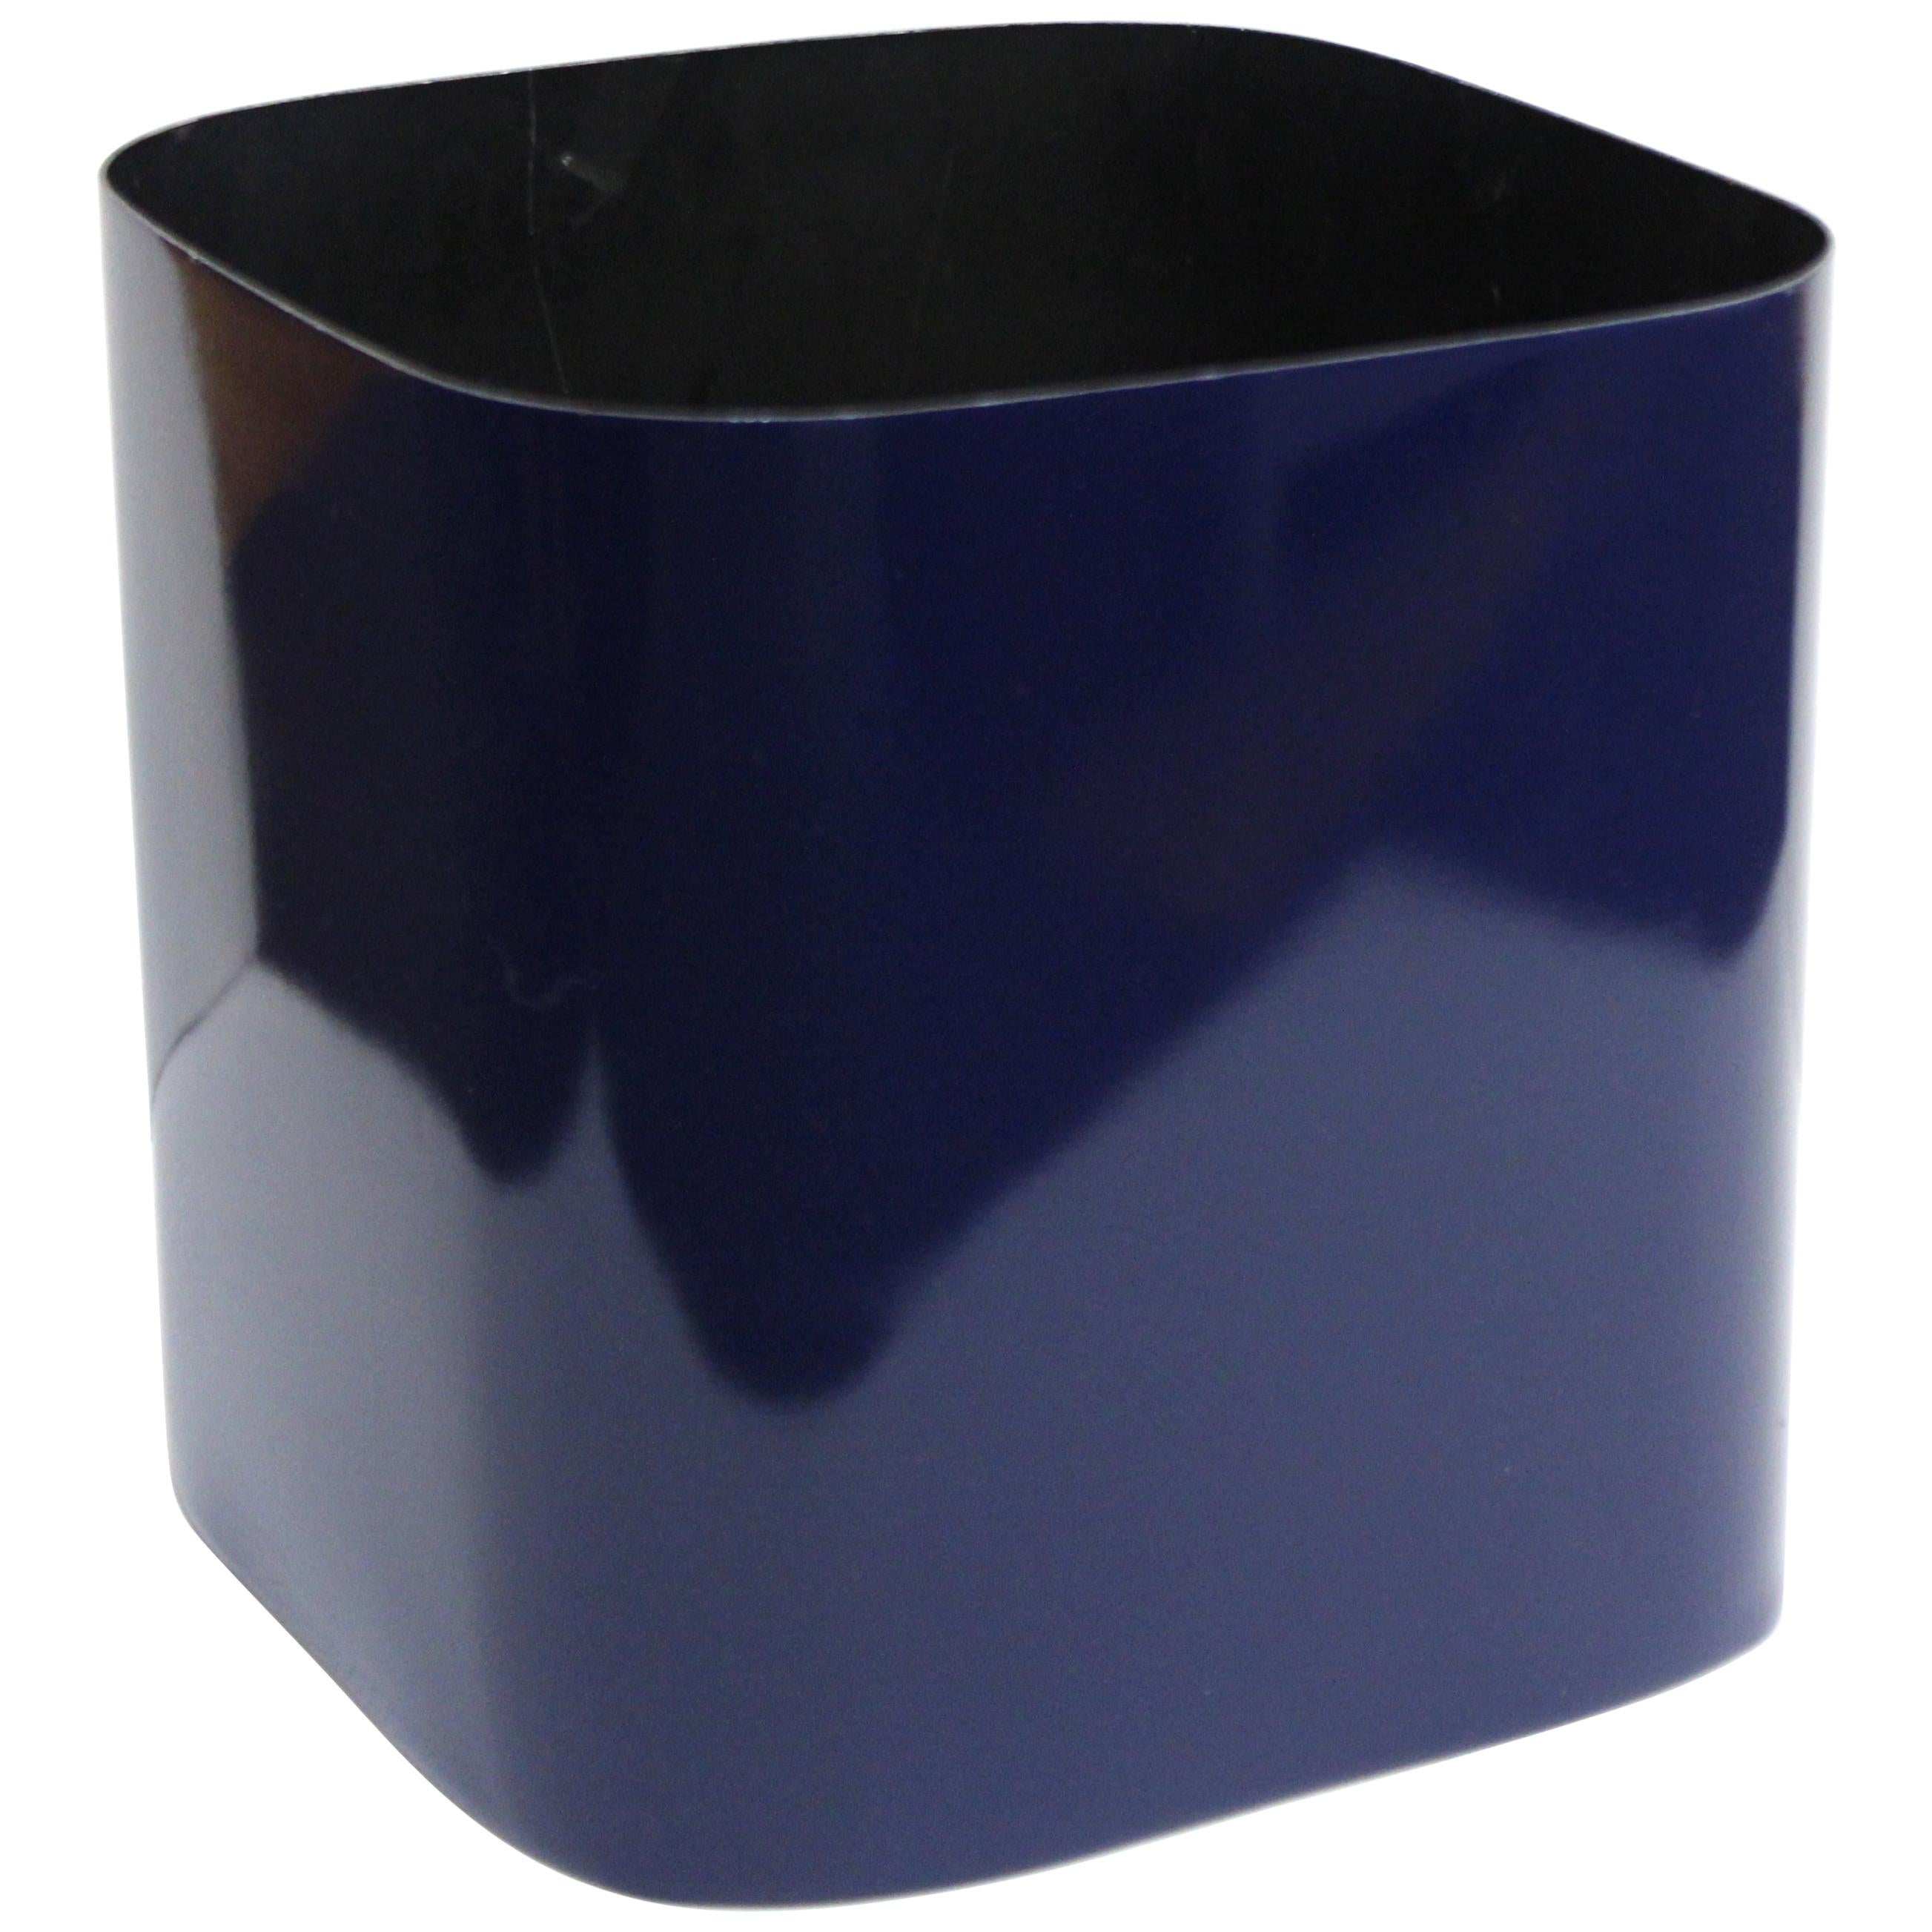 Paul Mayen For Habitat Modern Lacquered Metal Planter With Rounded Edges